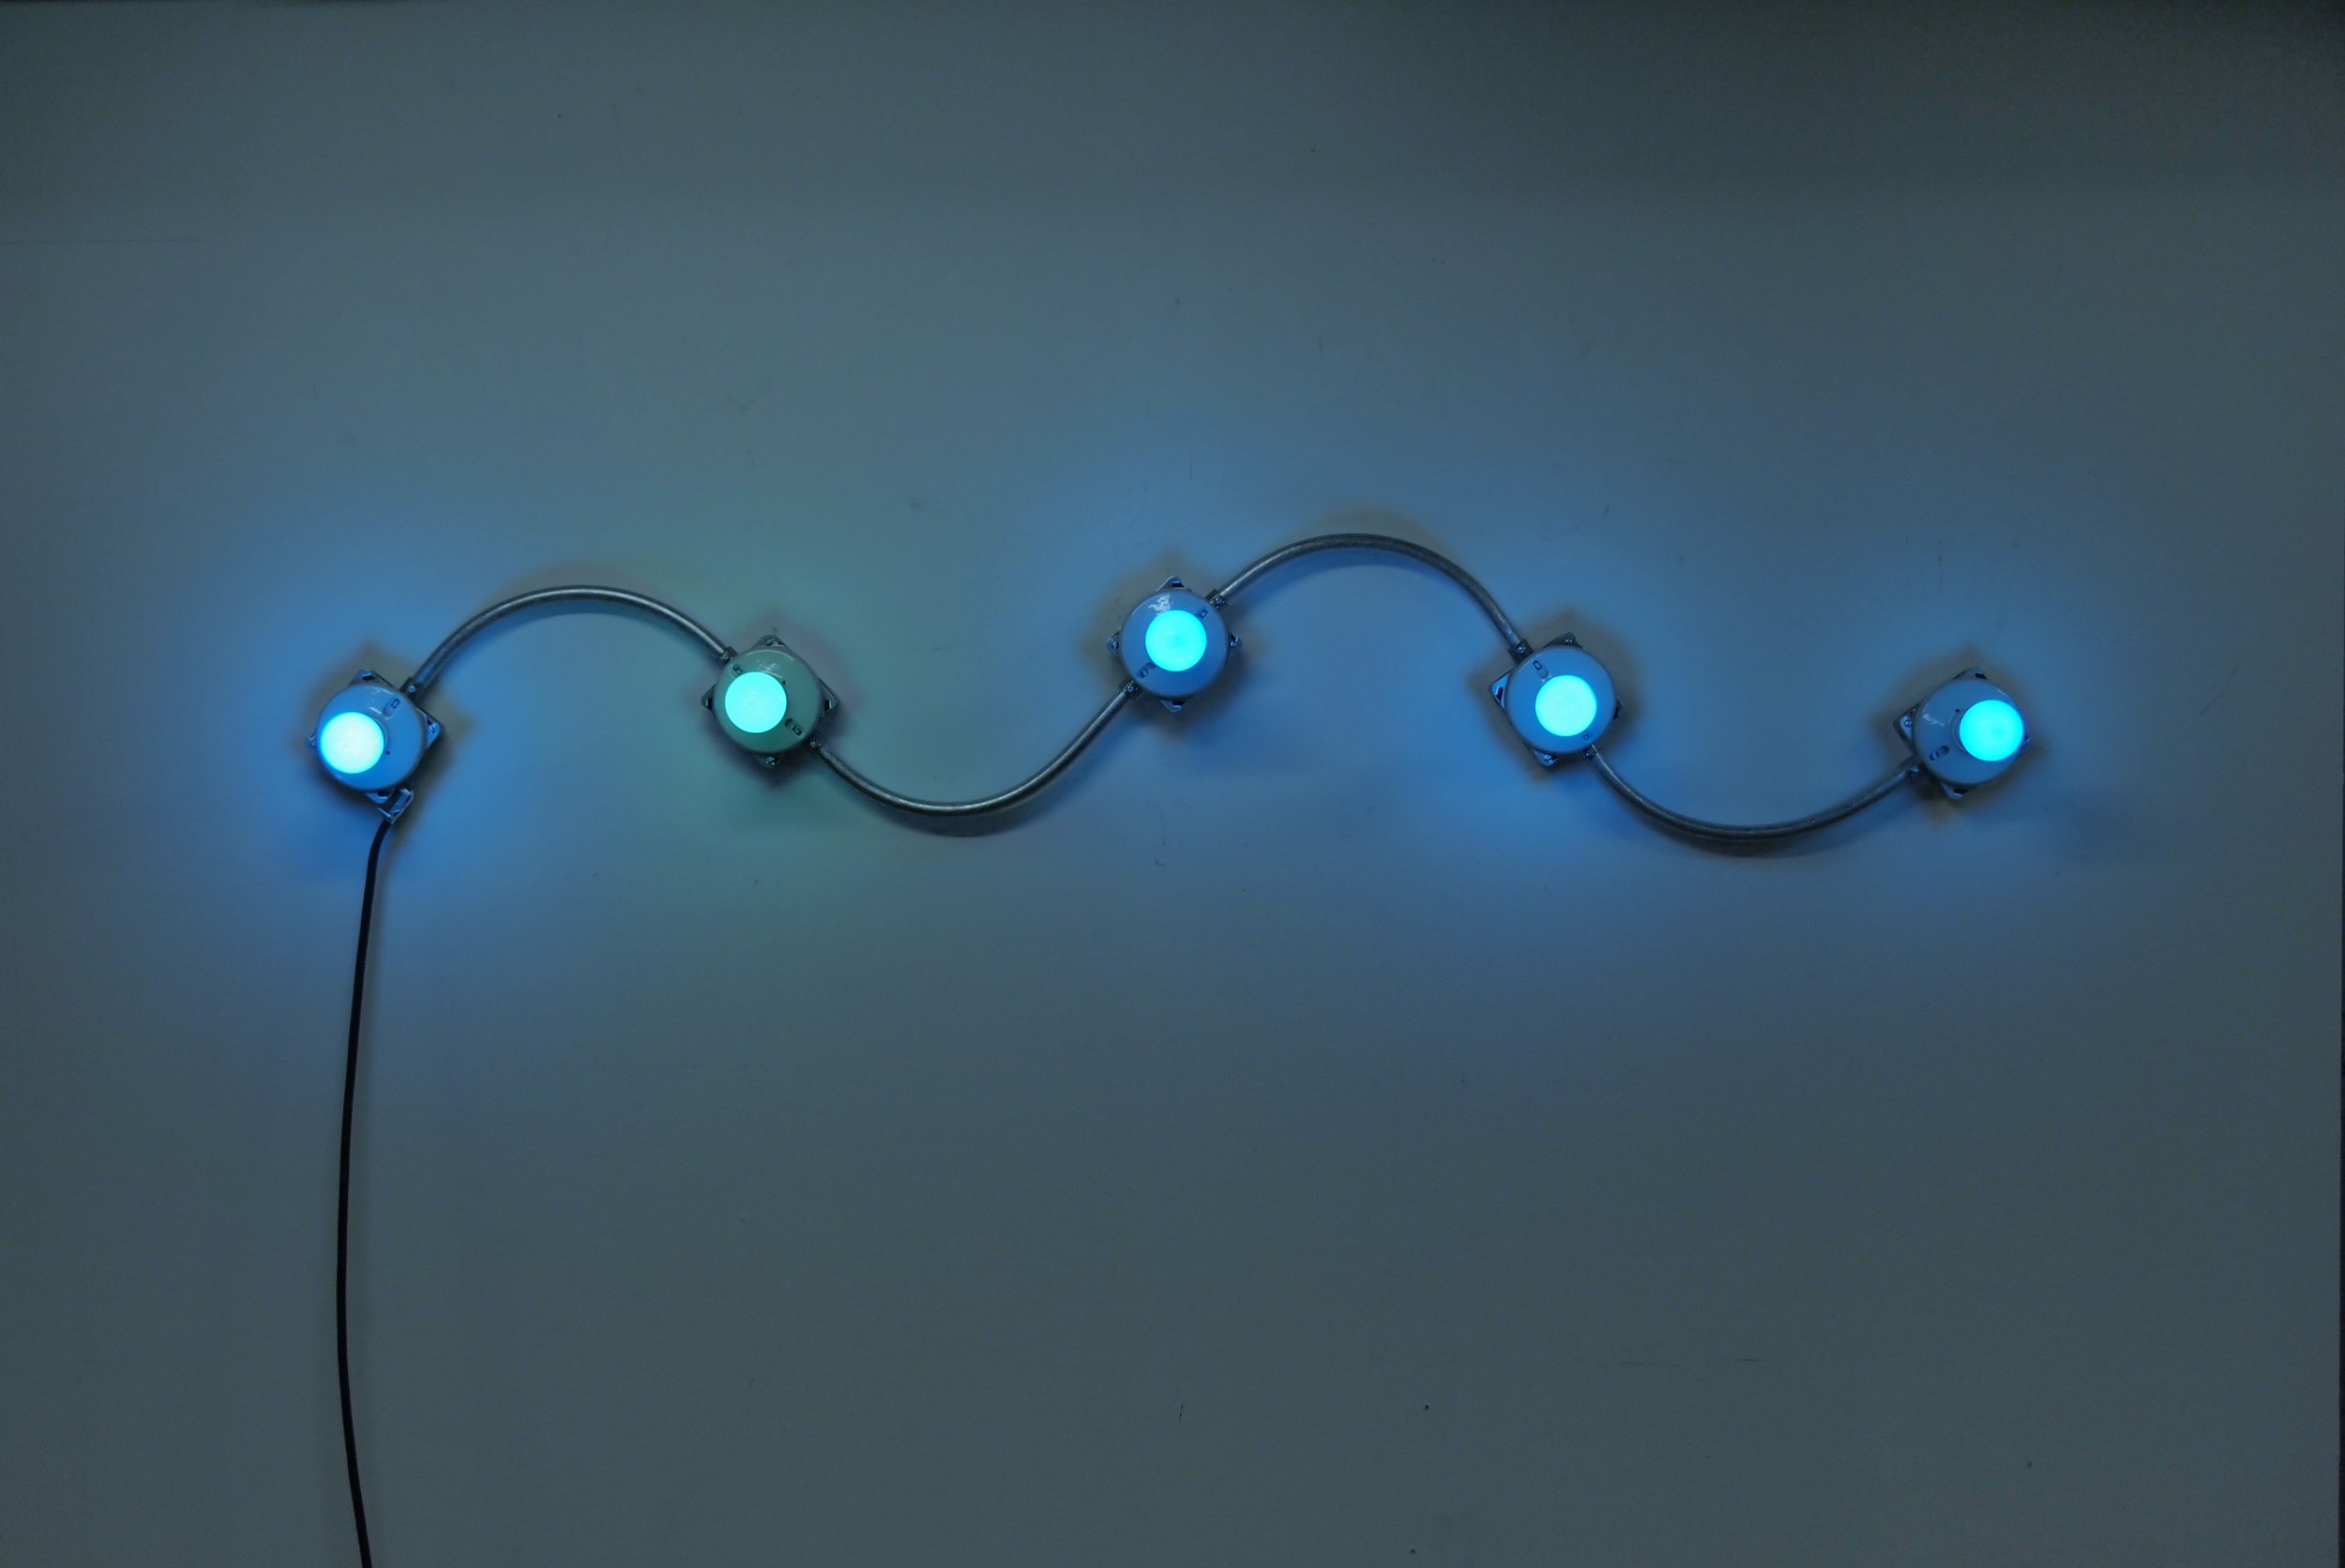   Conduits in Blue and Green (Figure 9), 2012.&nbsp;  Galvanized steel, copper wire, porcelain fixtures and ceramic coated light bulbs.  